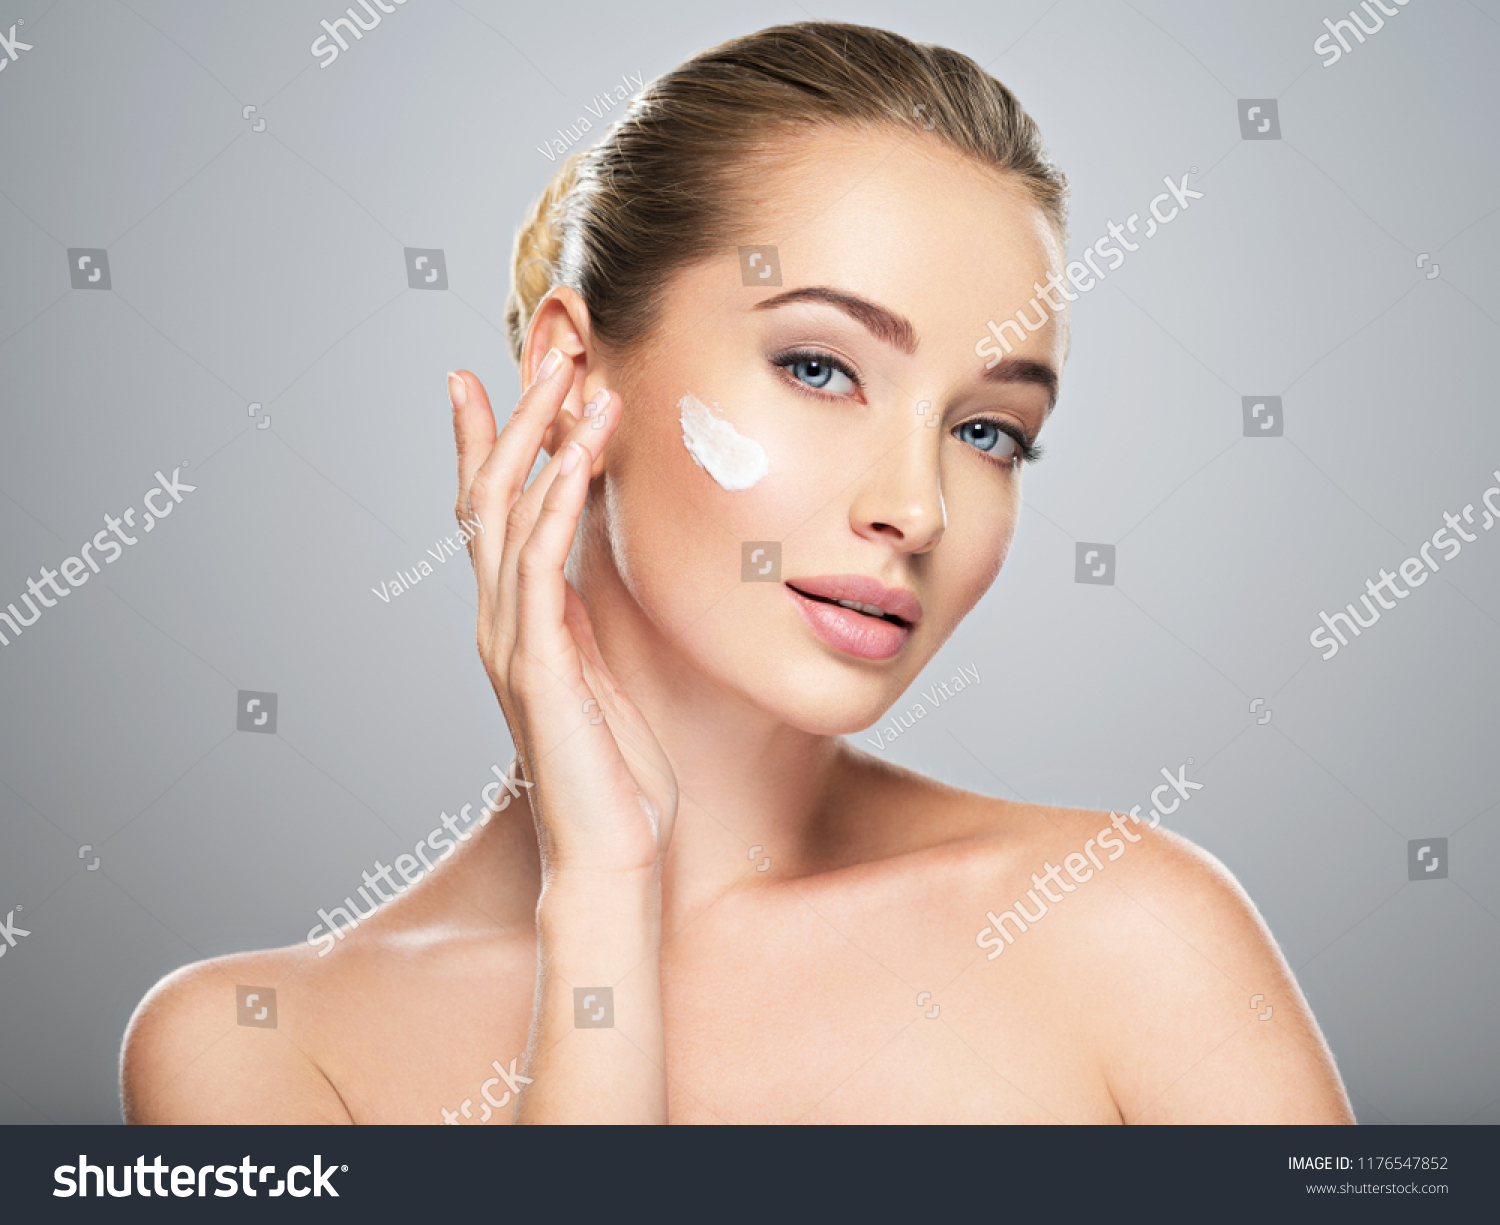 Beautiful young woman gets cream in the face. Skin care concept. Stunning caucasian woman with perfect health clean skin. Portrait of an Attractive girl  with blue eyes, closeup.  #1176547852